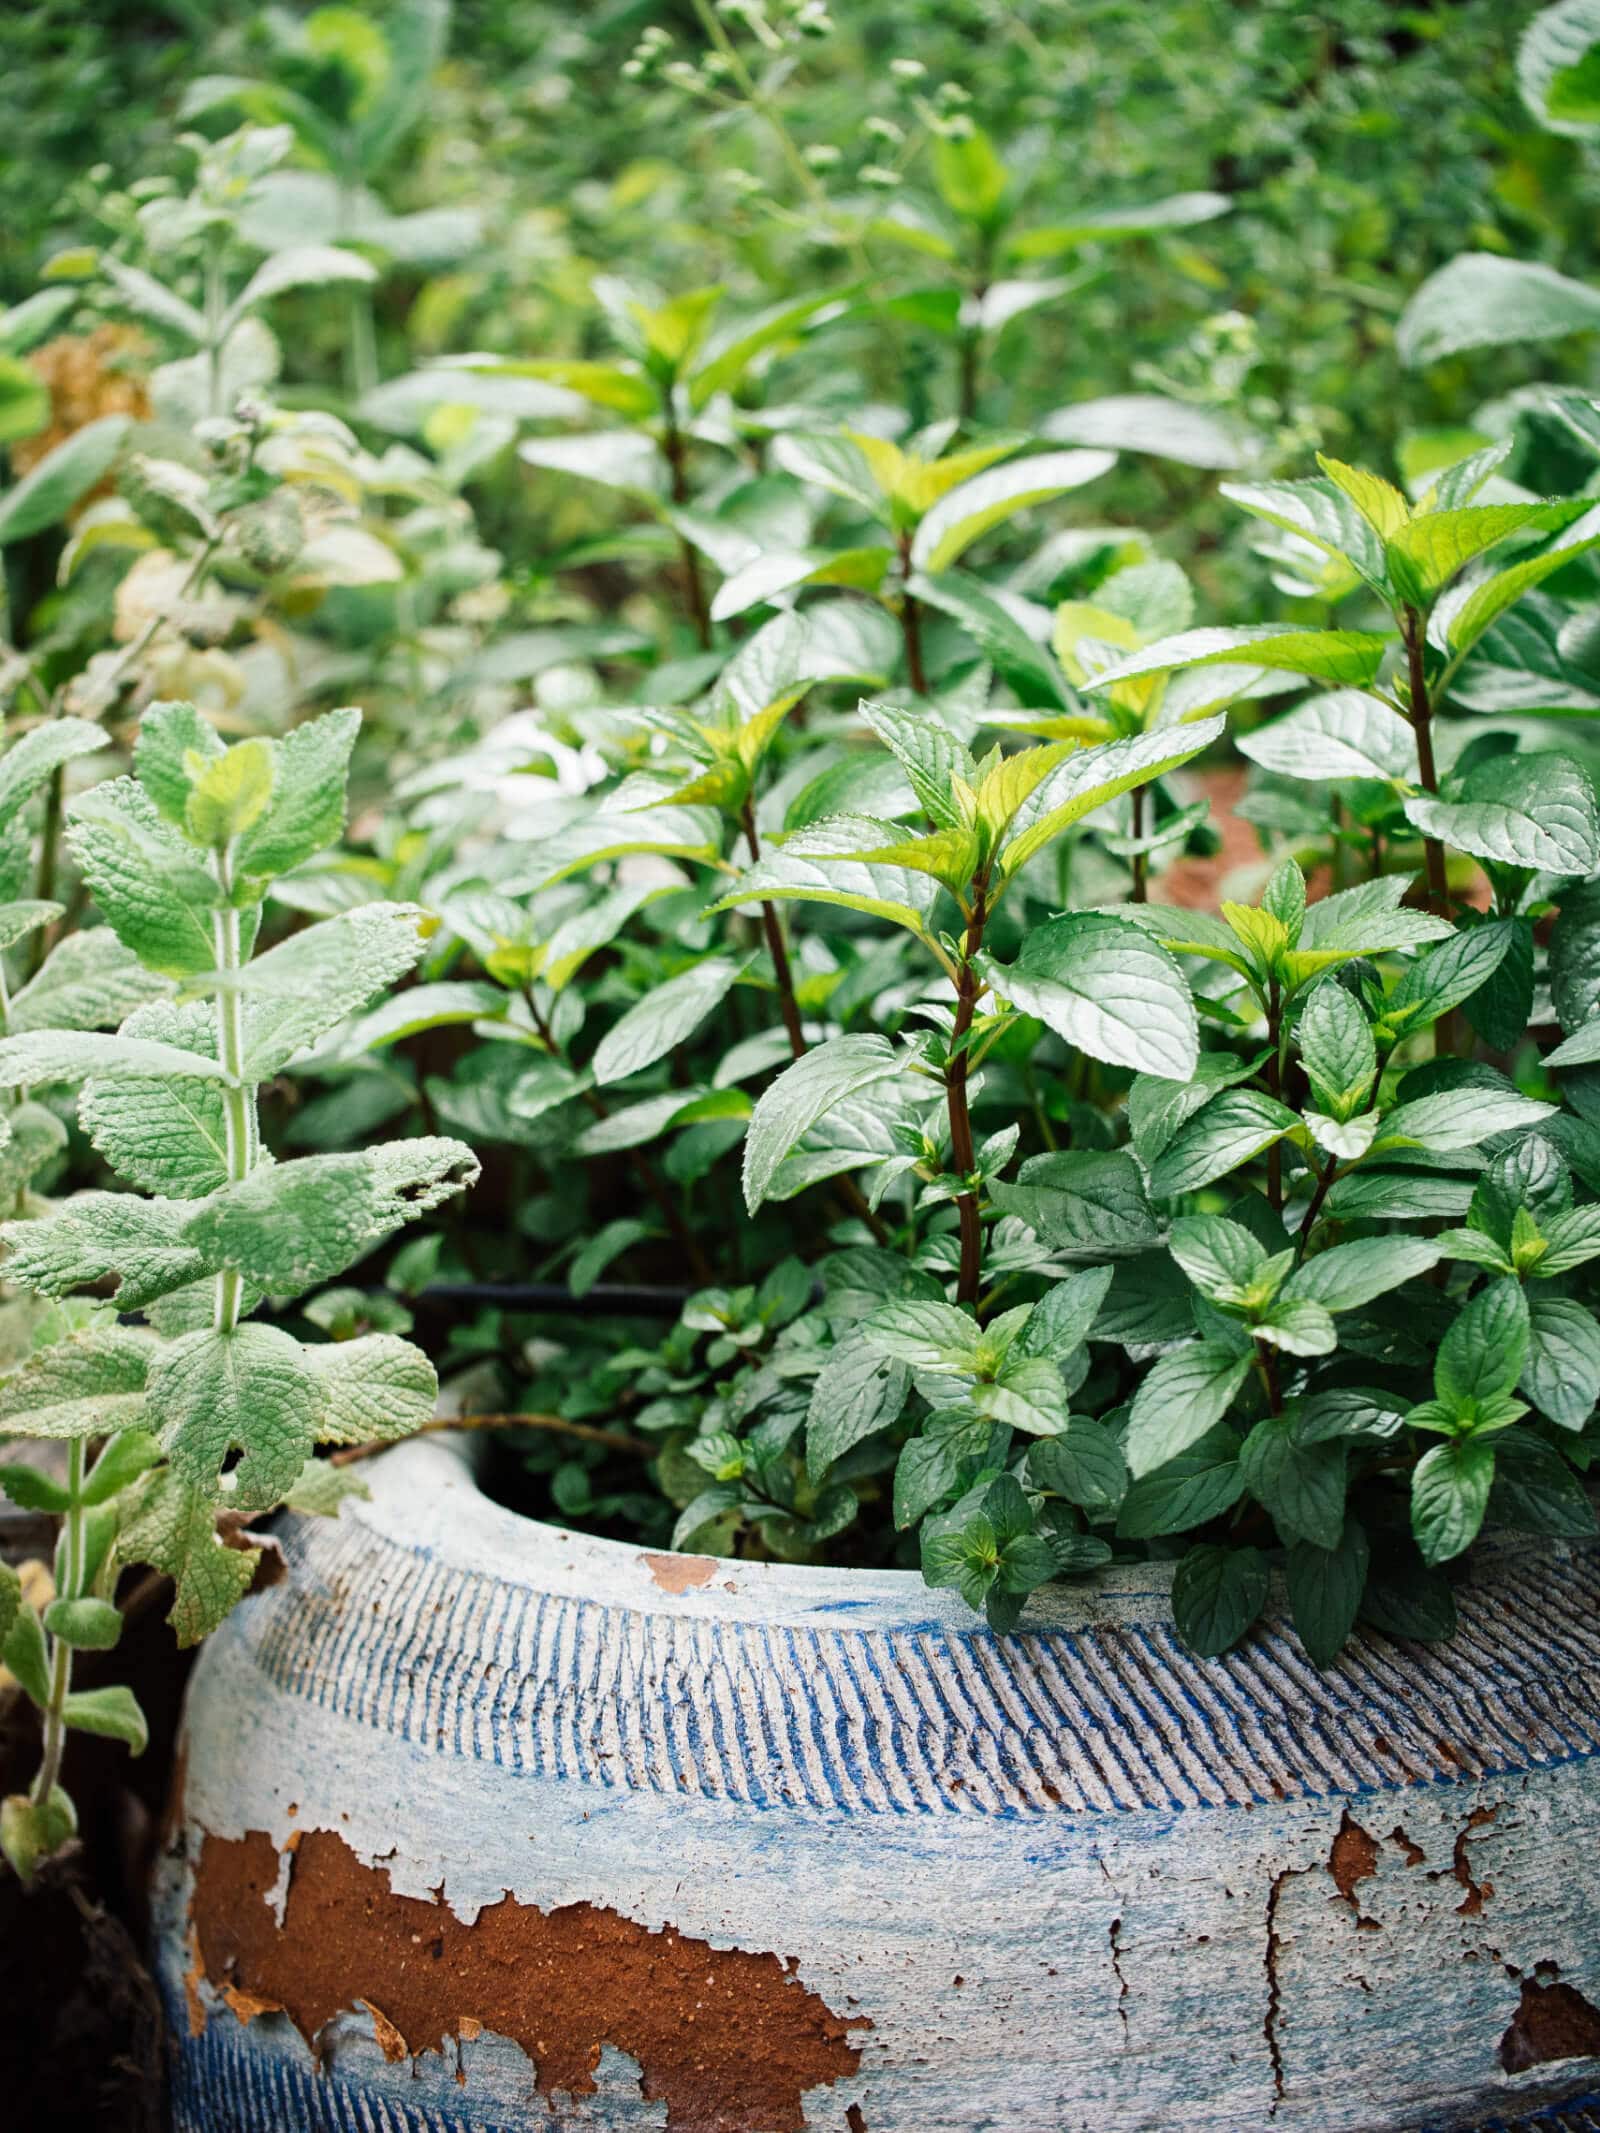 Mint is less aggressive when grown in shade